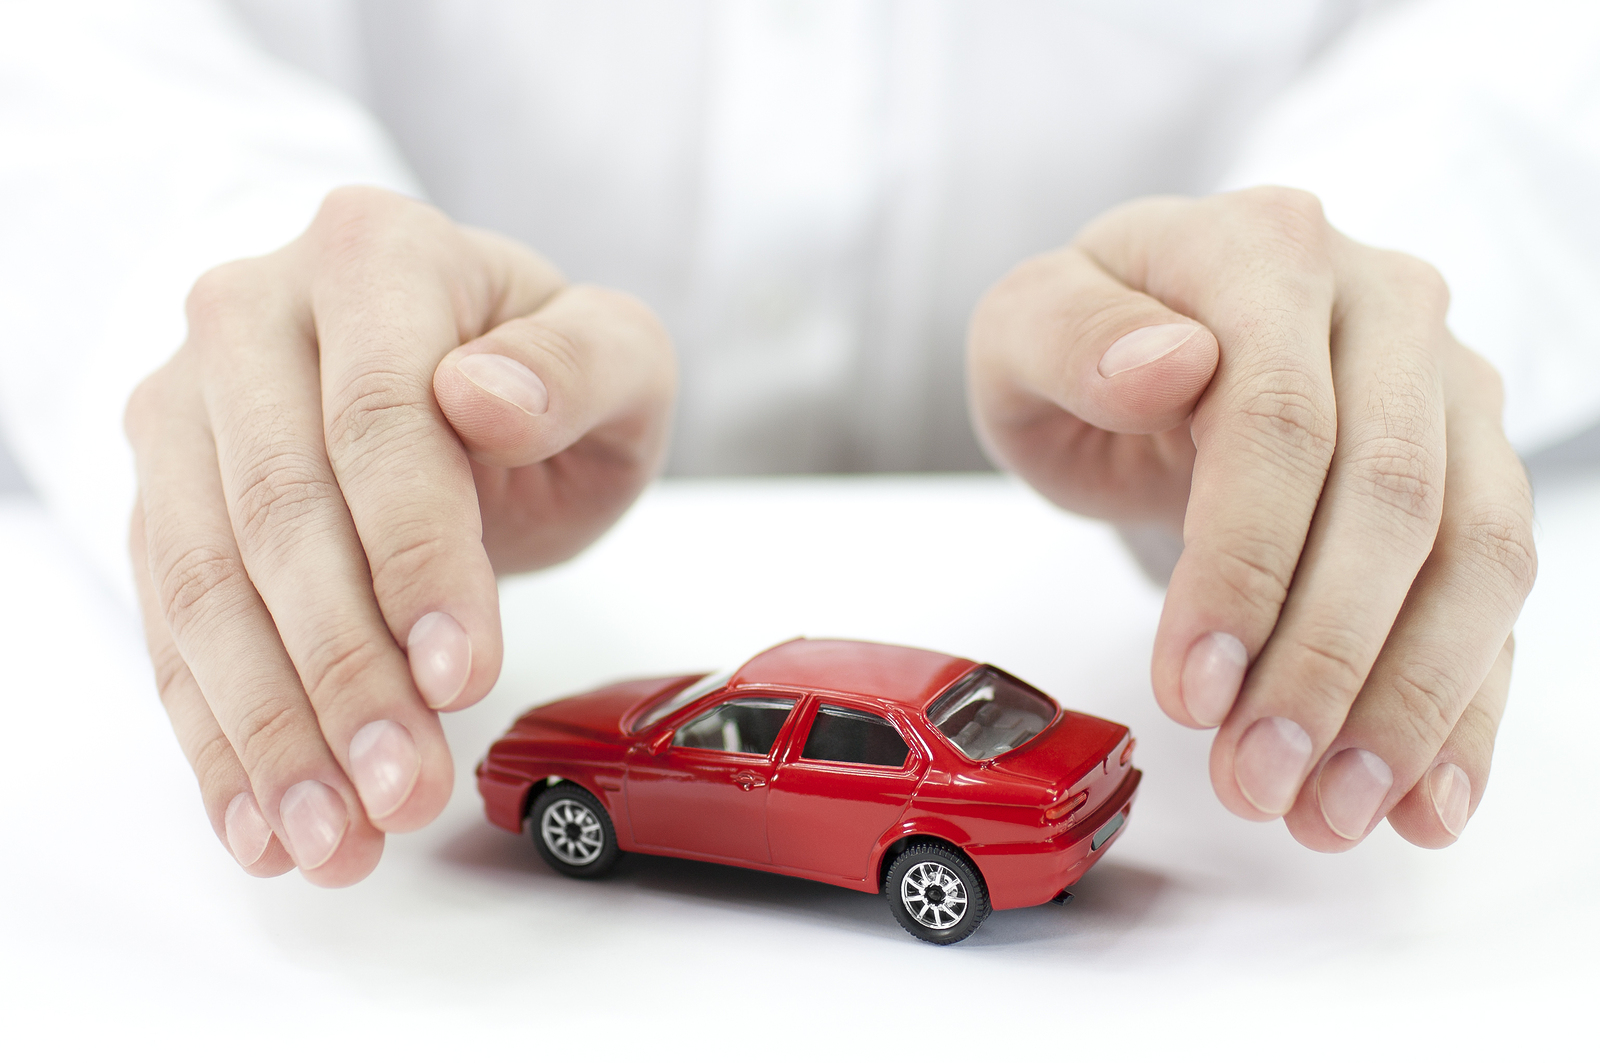 car insurance - protecting a toy car with hands